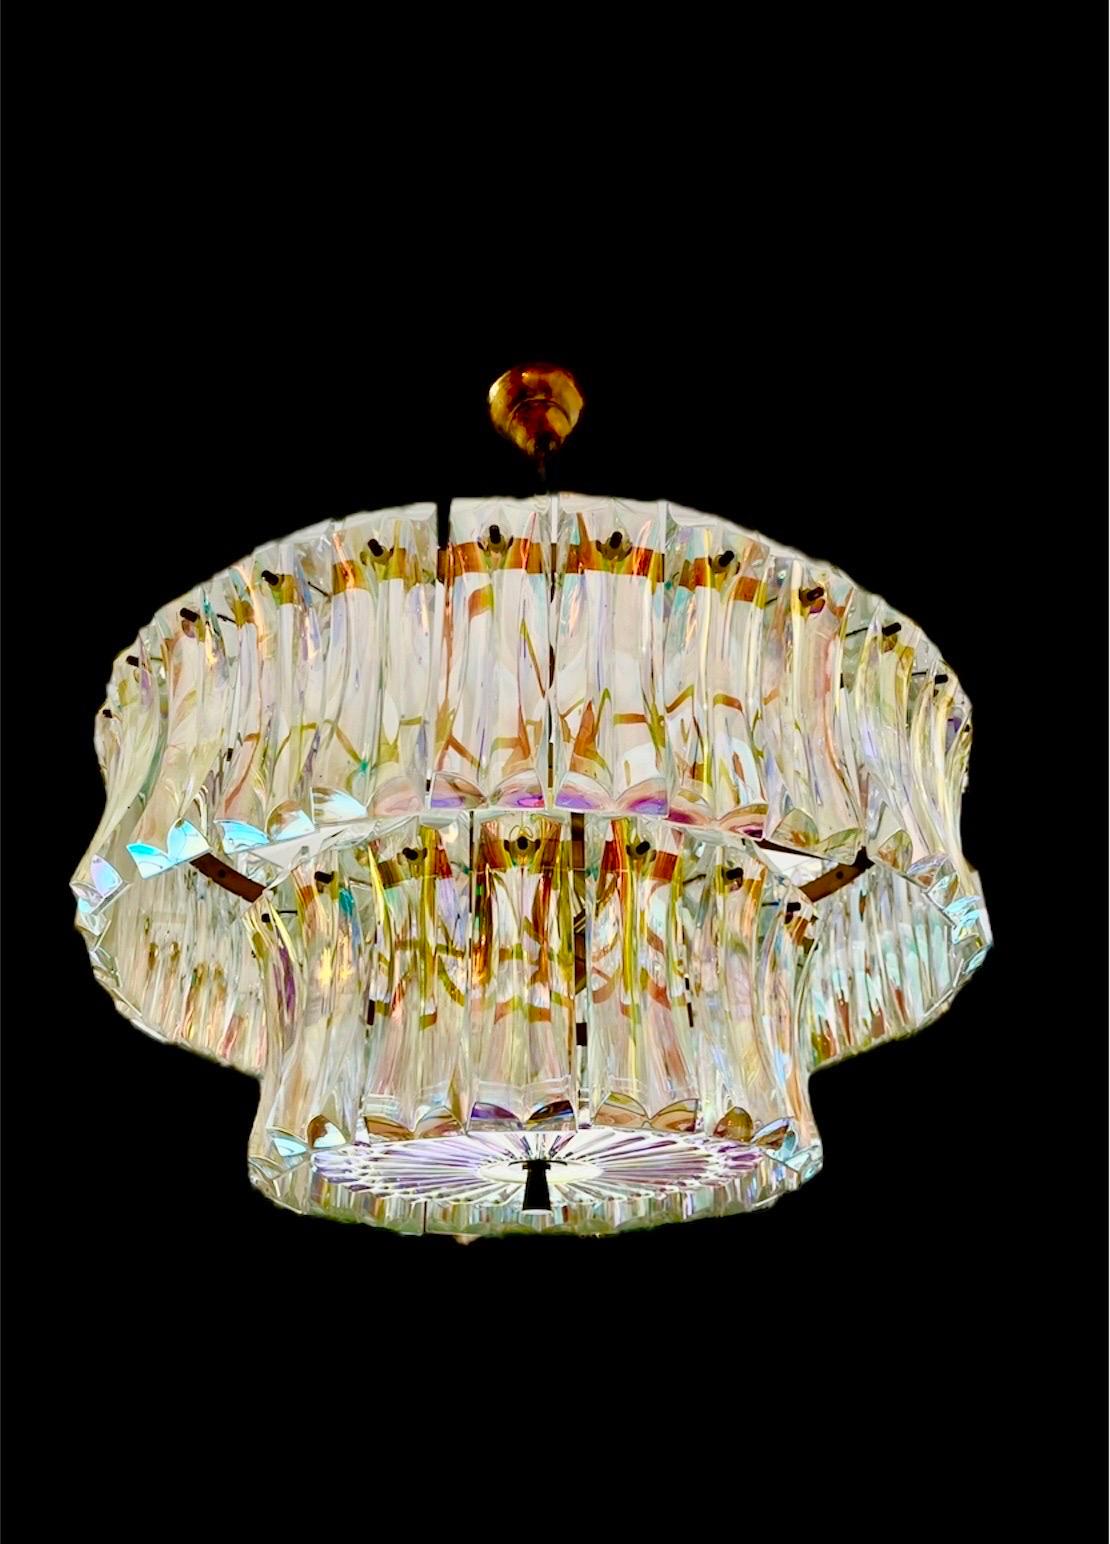 Venini iridescent xl chandelier with large Murano glass with brass structure. The design and the quality of the glass make this piece the best of Italian design.
This unique chandelier by Venini in murano glass is exceptional.

Venini is an Italian